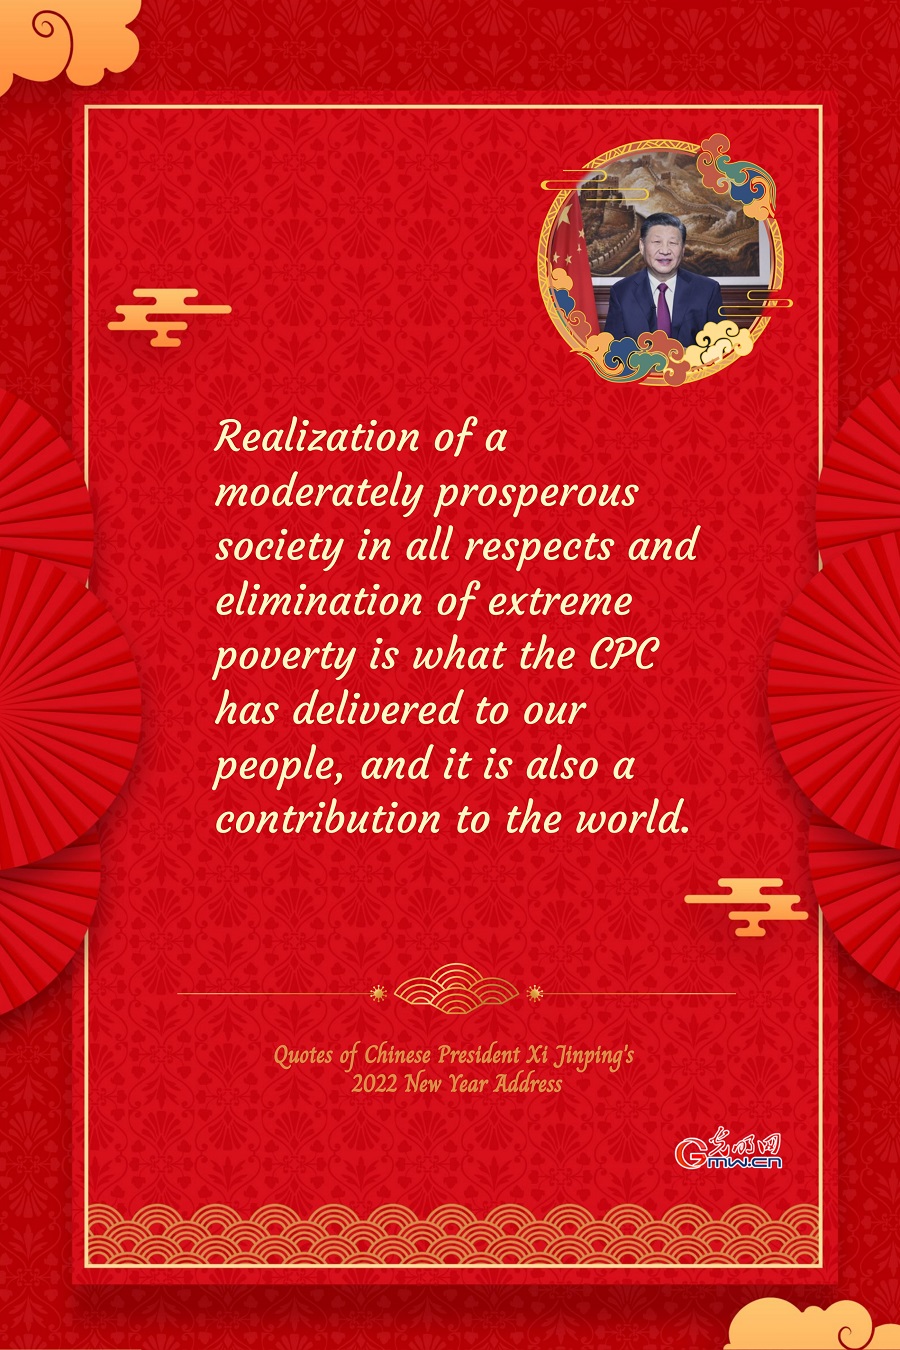 Key quotes of Xi's 2022 New Year Address: Working together for a shared future